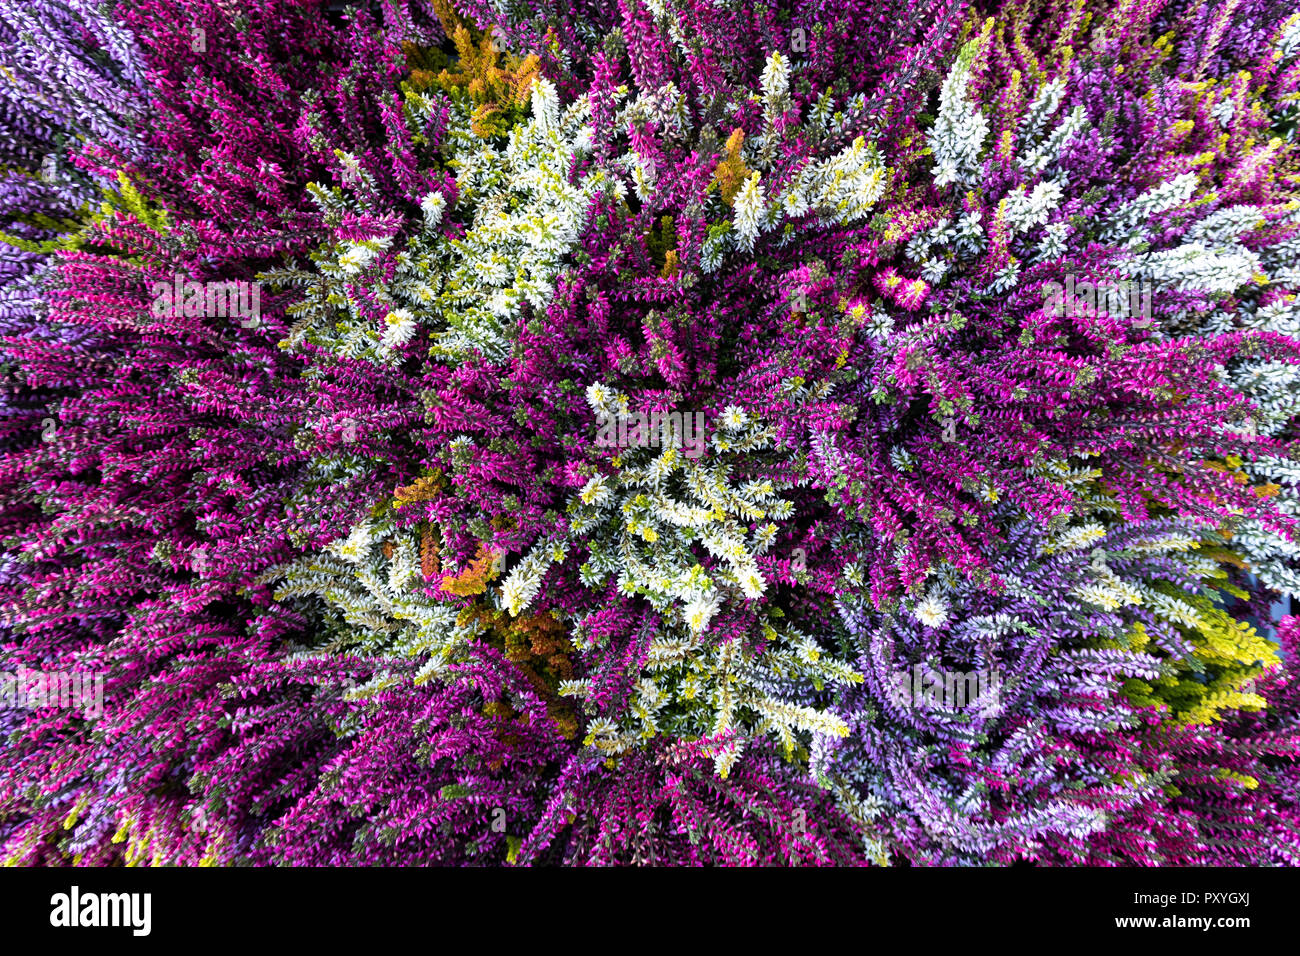 Background of pink, purple, white and green heather in bloom from above. Stock Photo